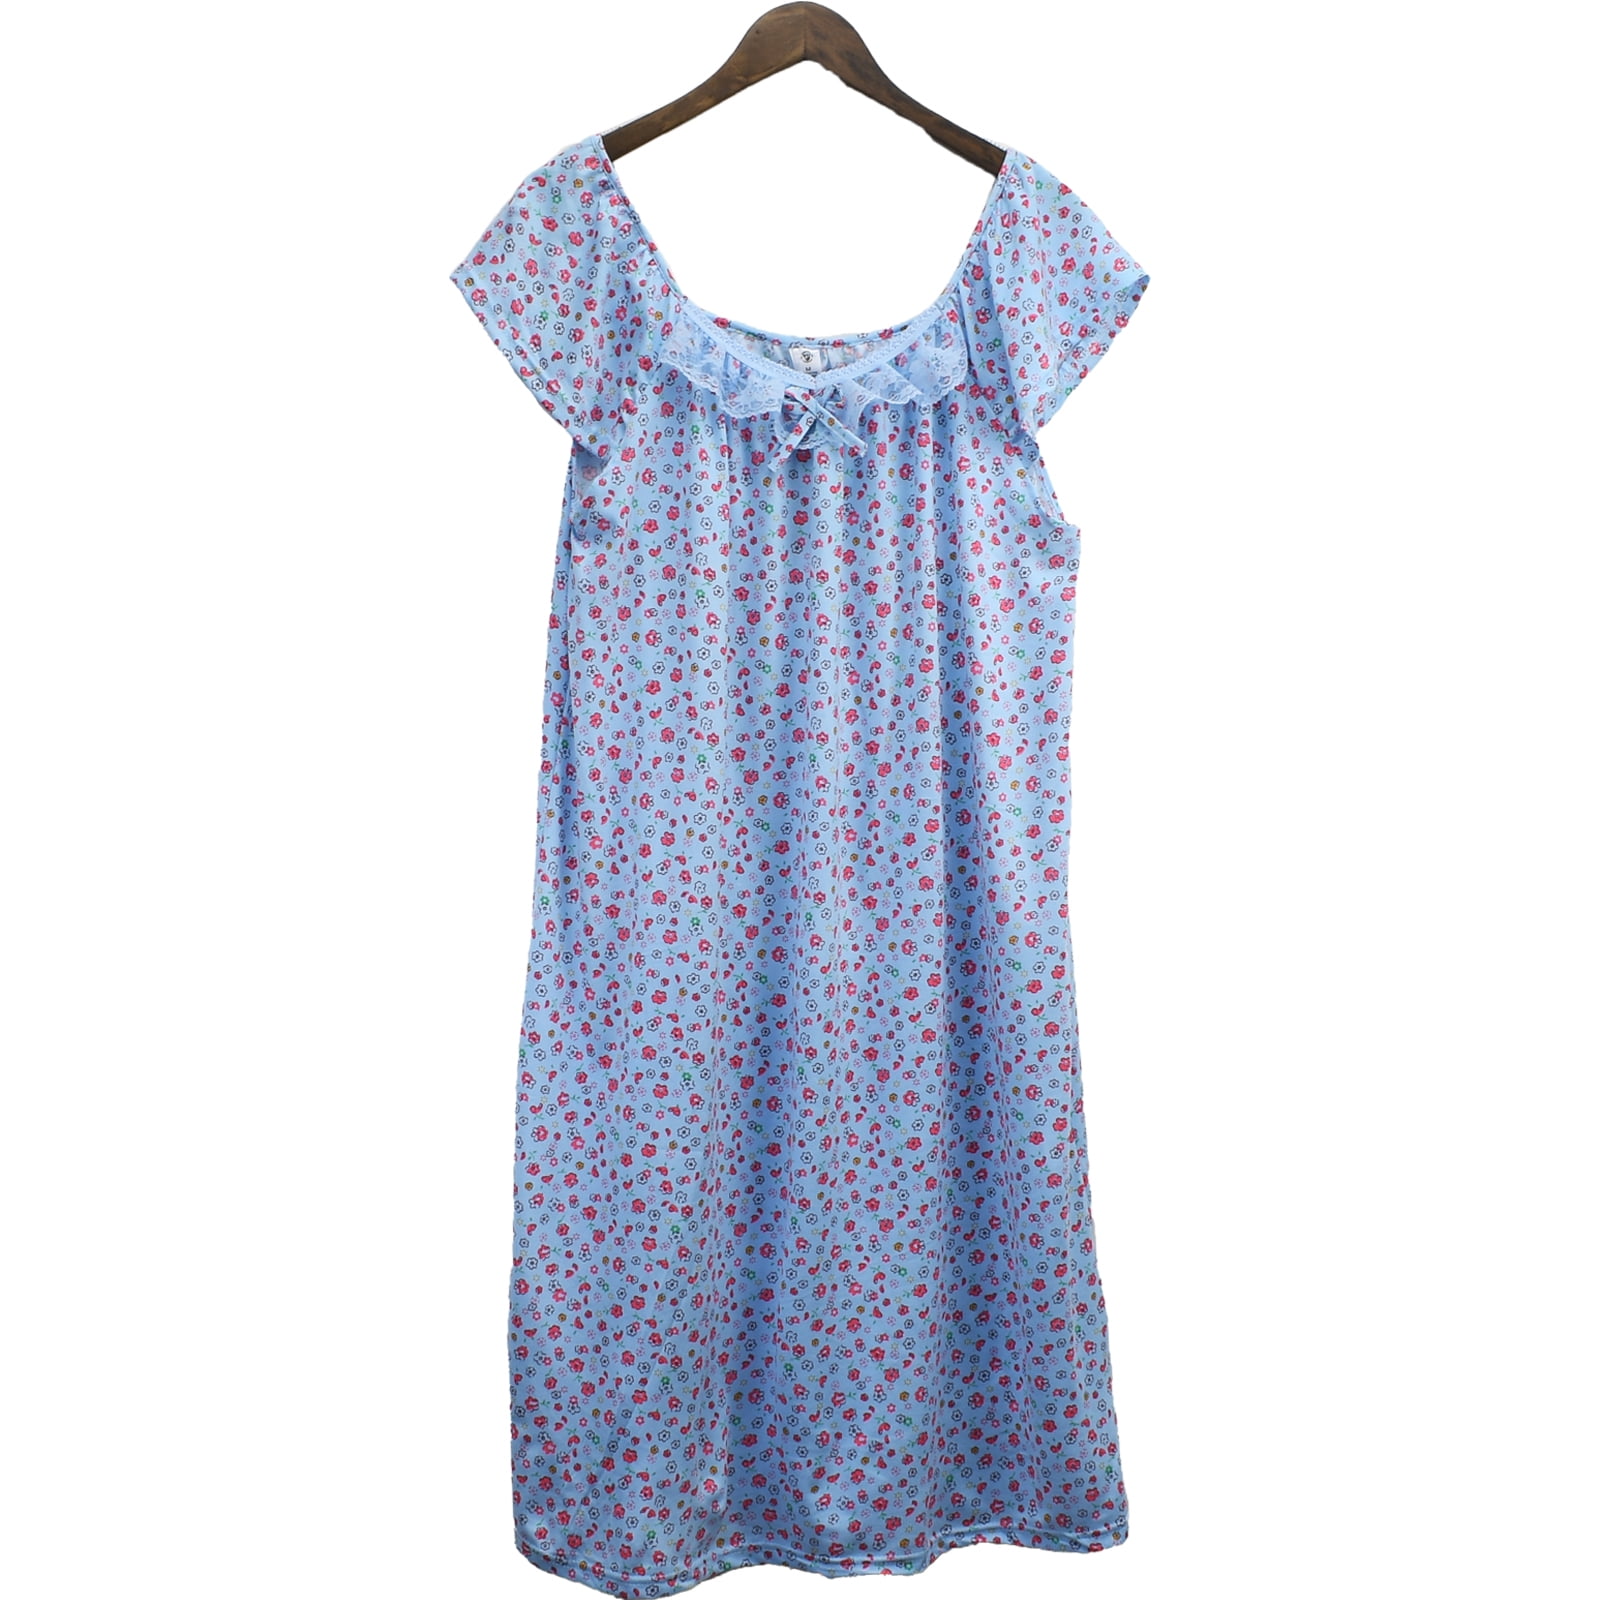 S.CHRISTINA Cotton Nightgown For Women Assorted Print Floral Lace ...